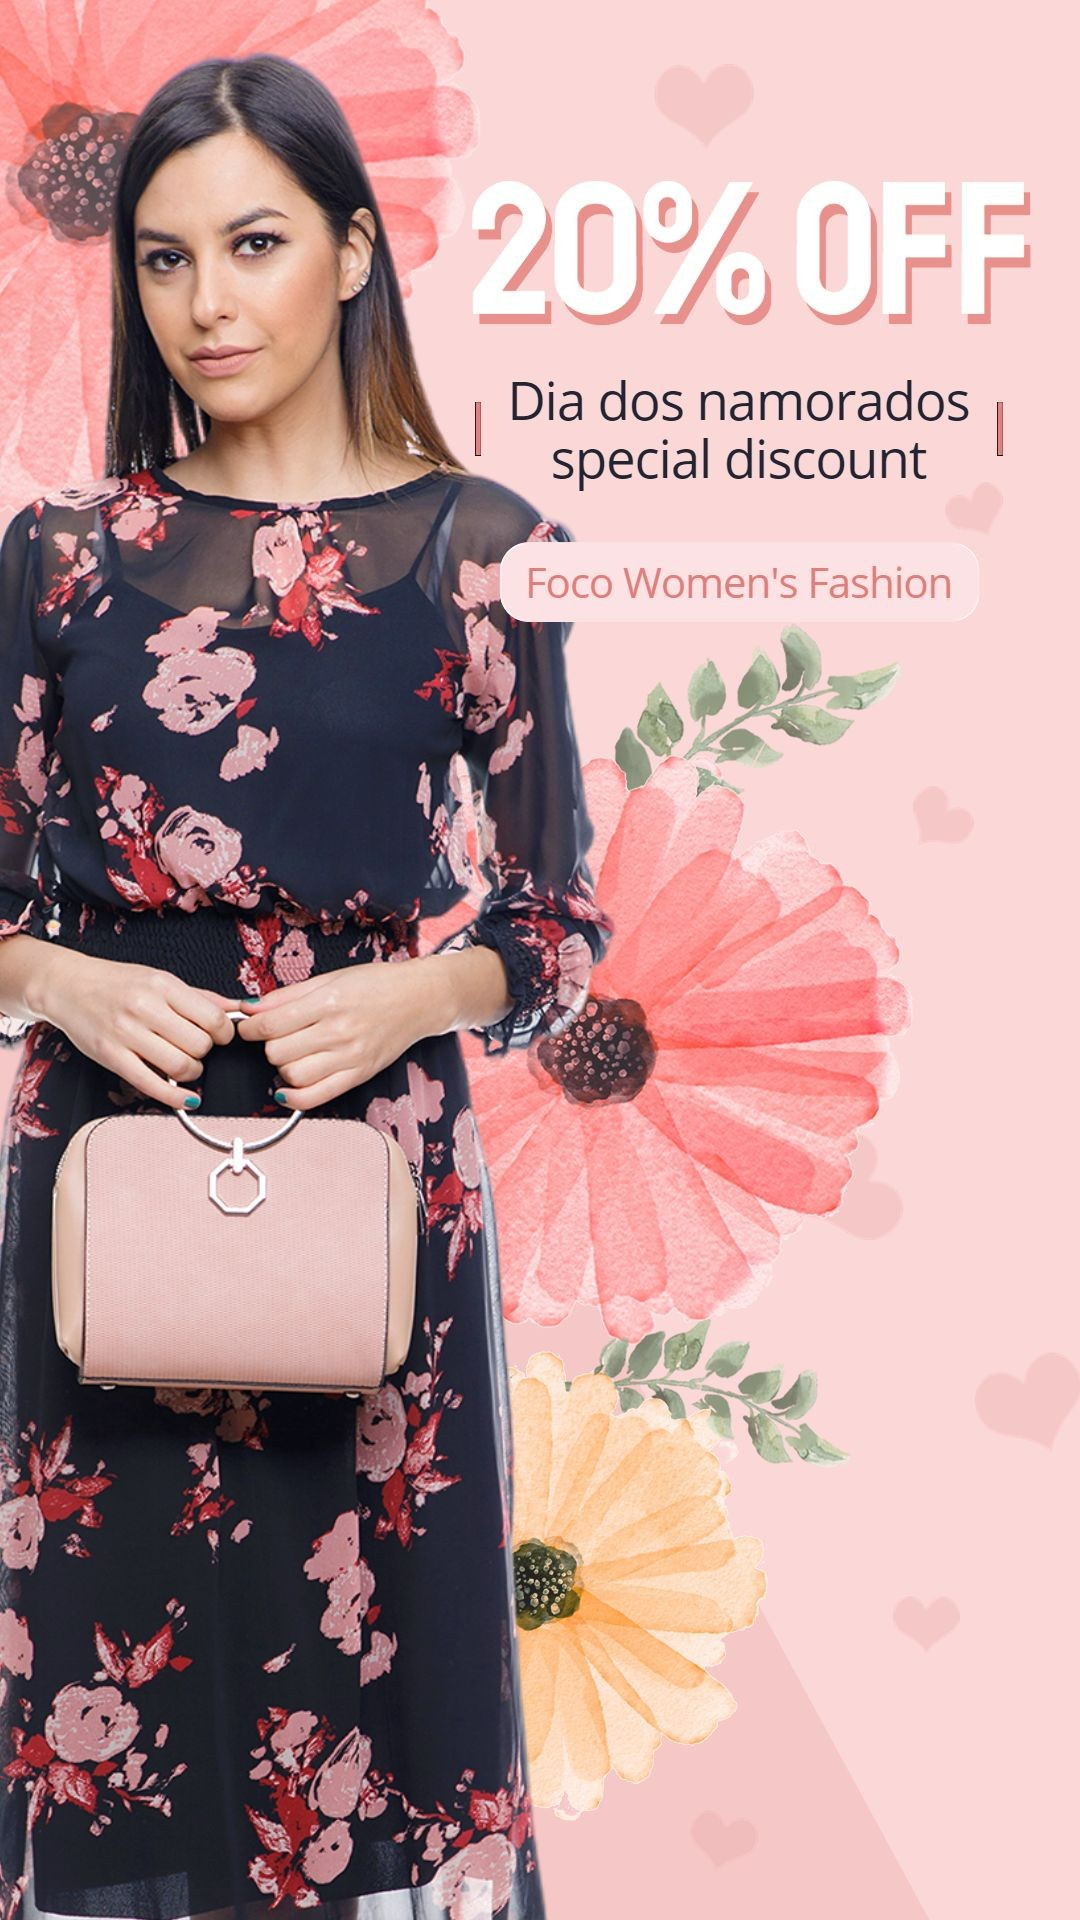 Brazil Valentine's Day Dia dos Namorados Floral Campaign Women's Fashion Discount Sale Promo Ecommerce Story预览效果